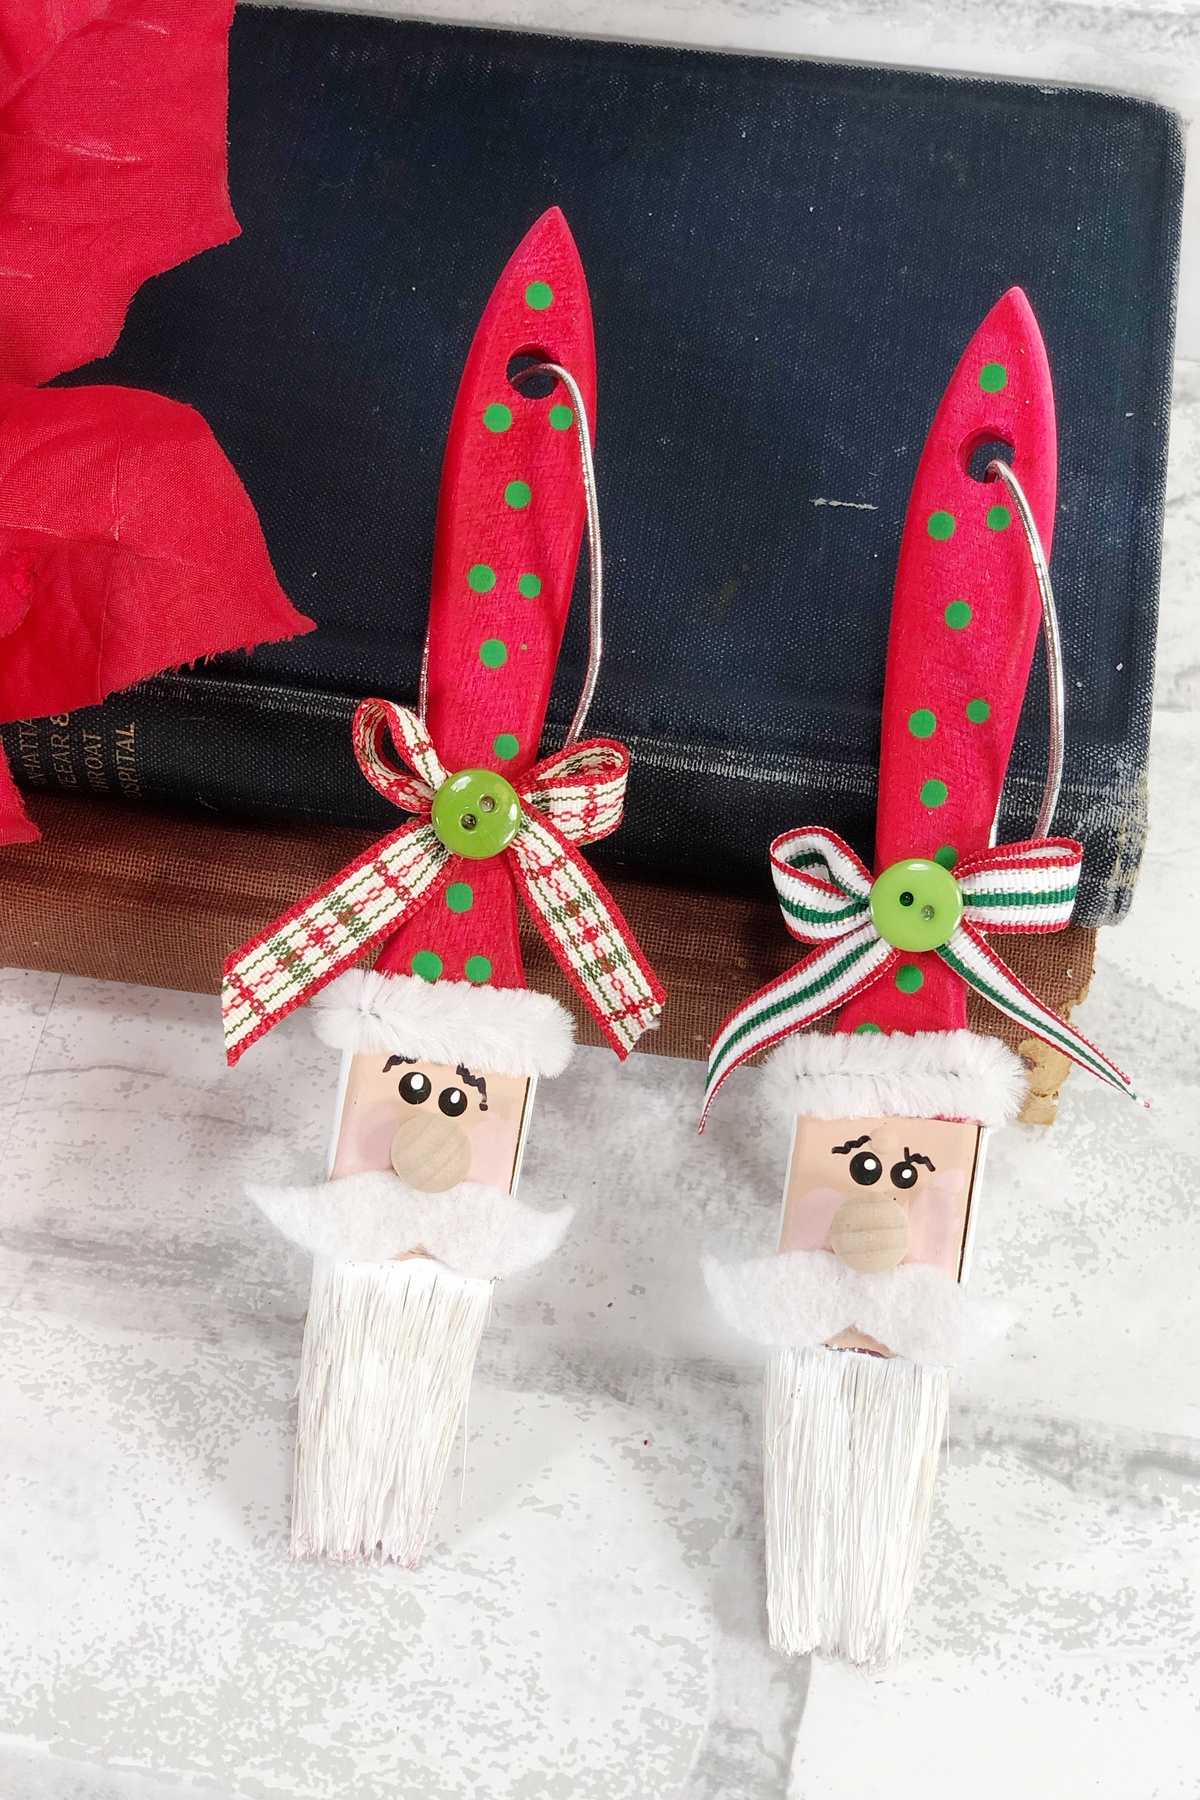 Paintbrushes made into Santa ornaments leaning against book